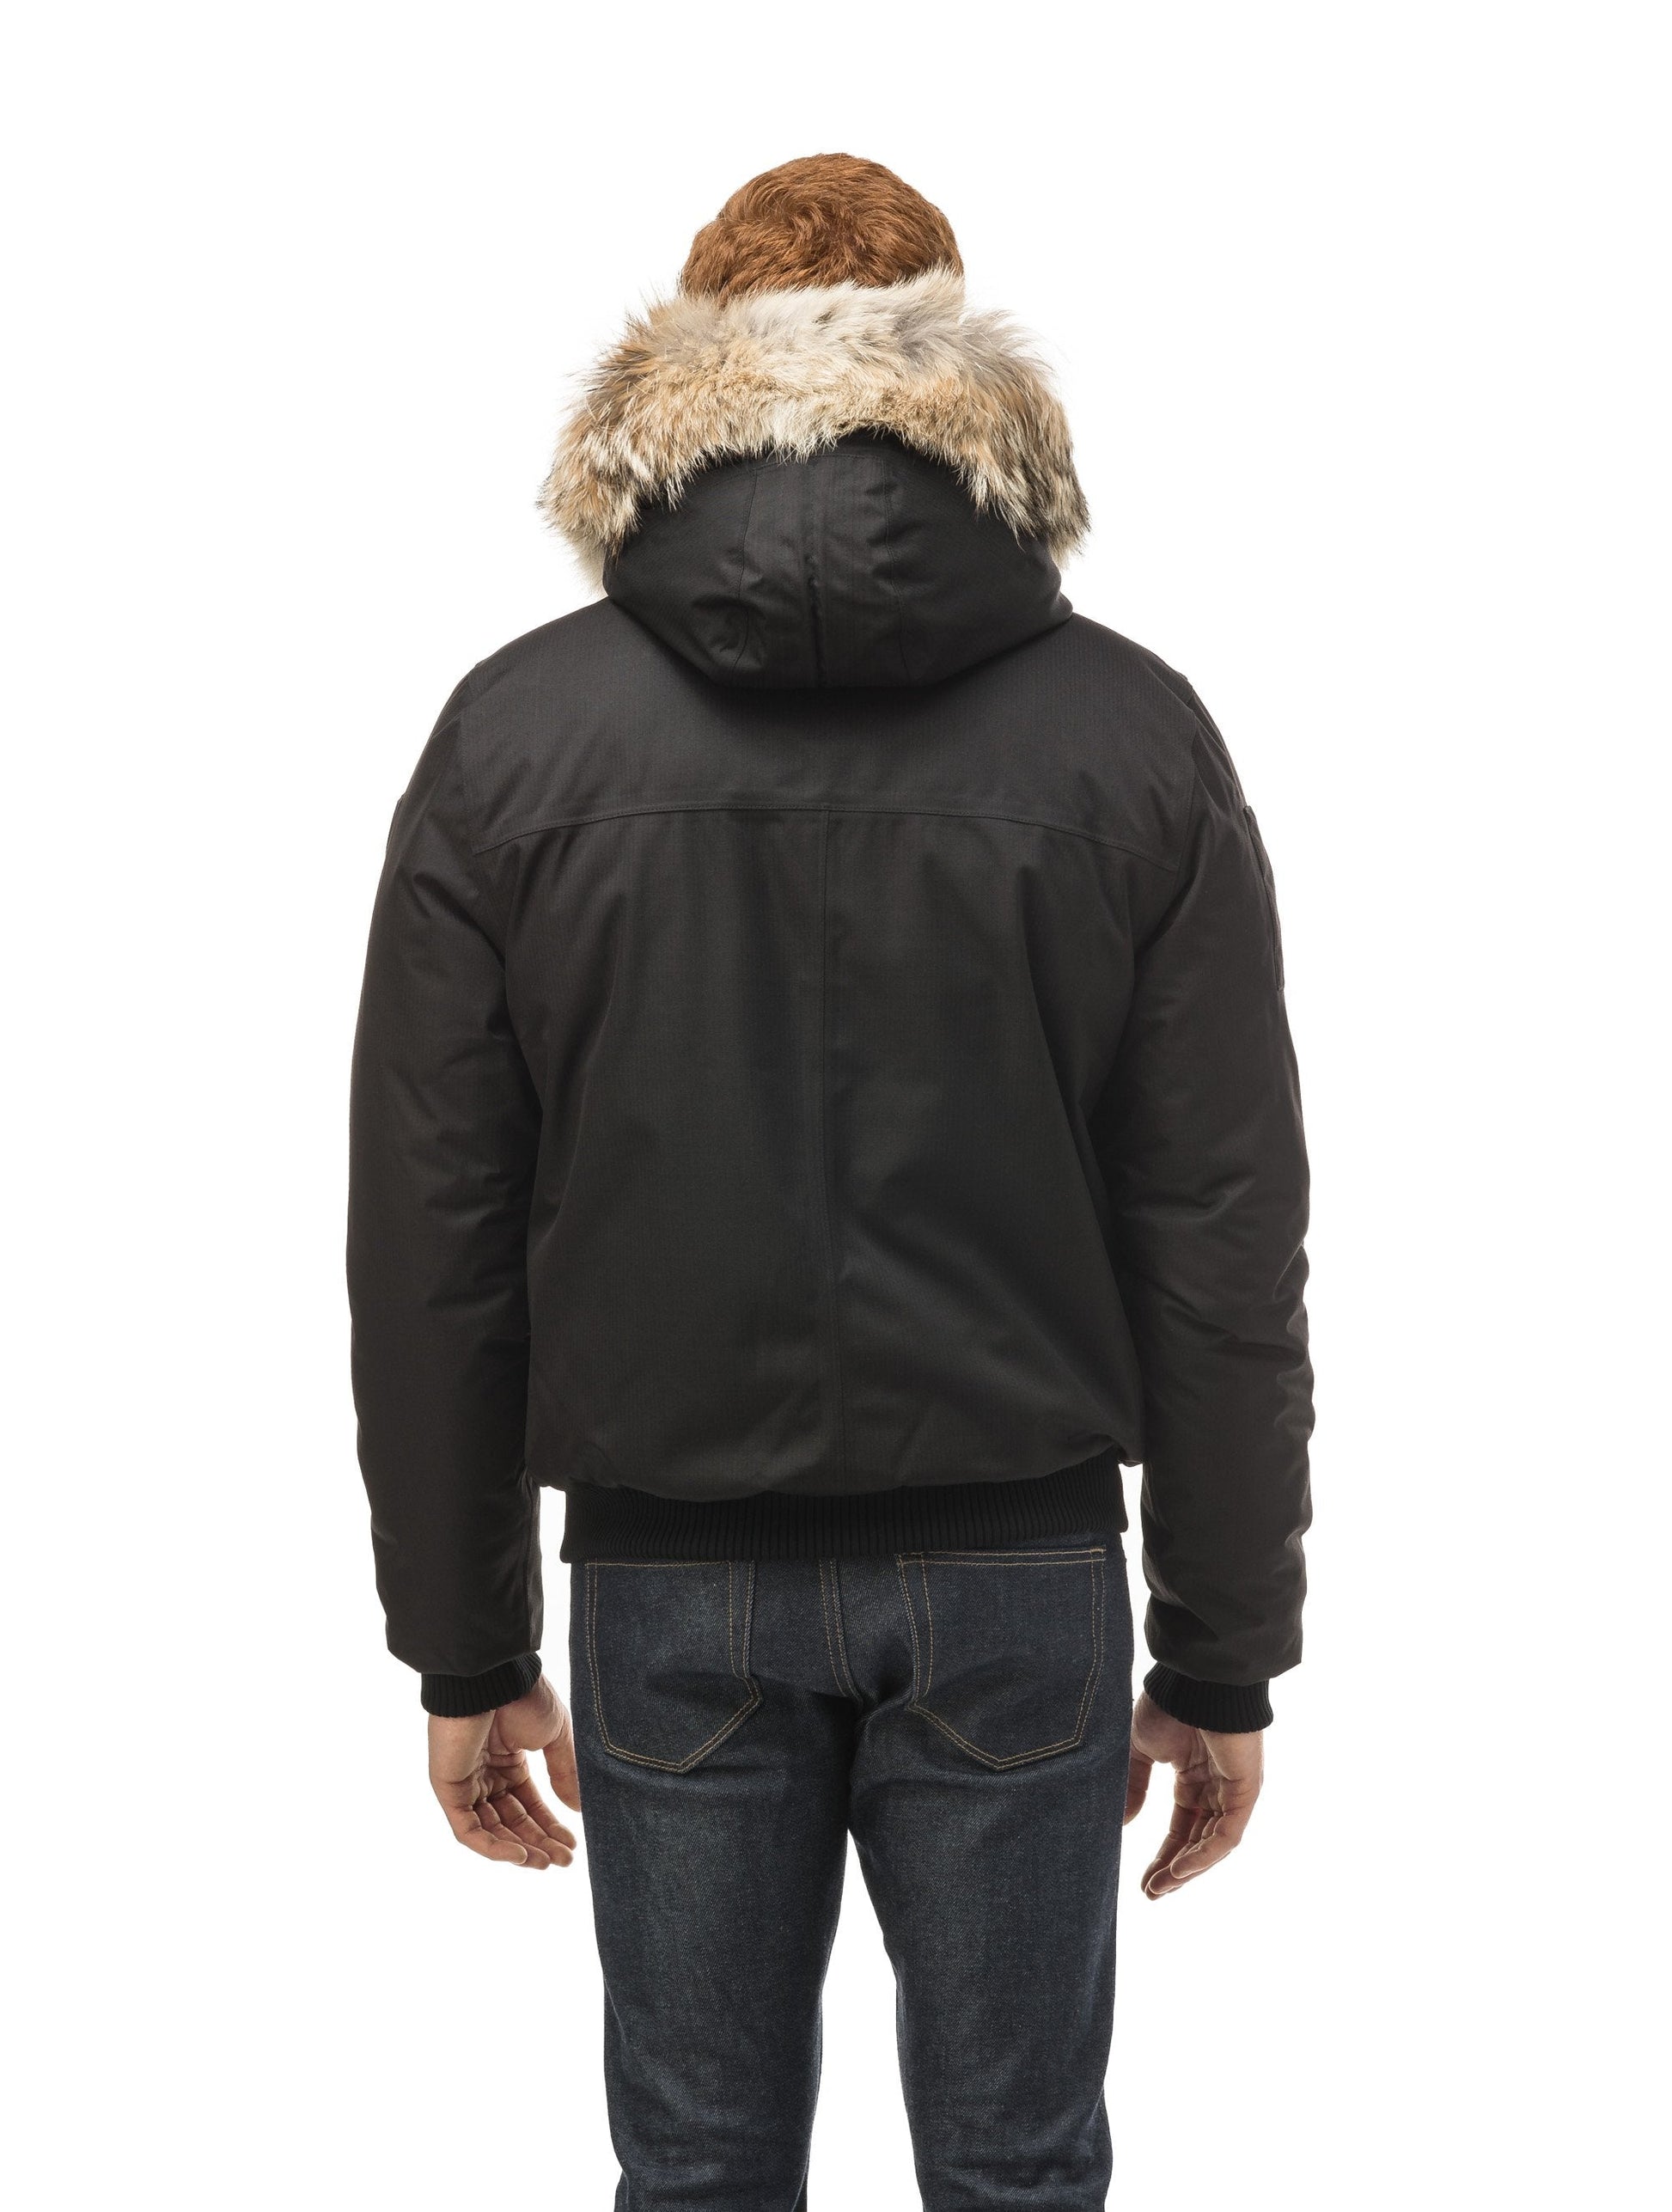 Men's classic down filled bomber jacket with a down filled hood that features a removable coyote fur trim and concealed moldable framing wire in Black